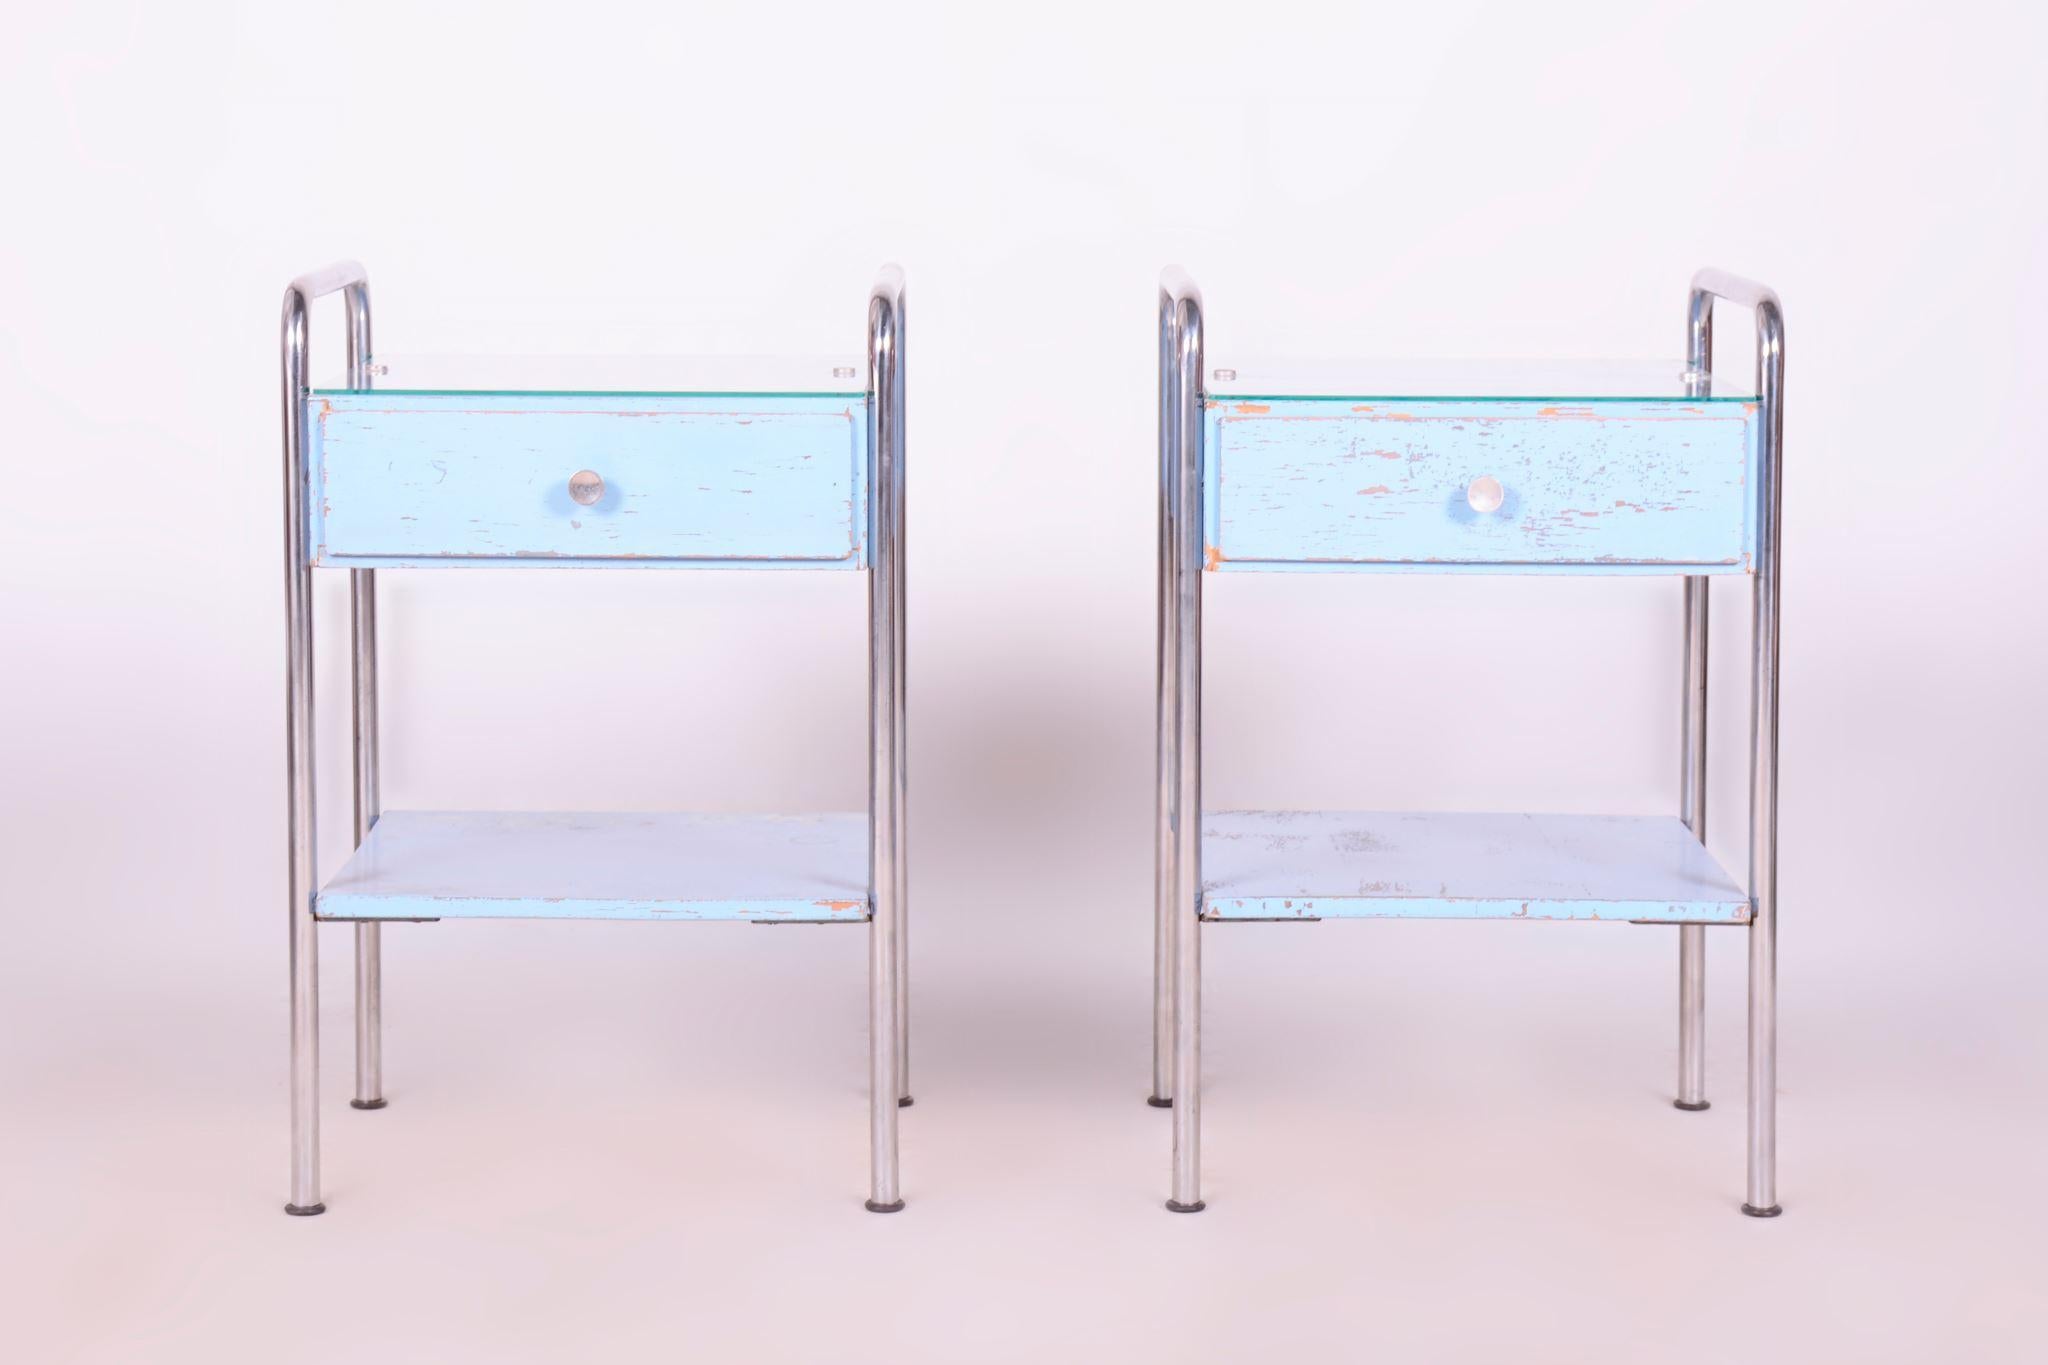 Bauhaus Pair of Bed-Side Tables, Mücke Melder, Plywood, Czechia, 1930s For Sale 3